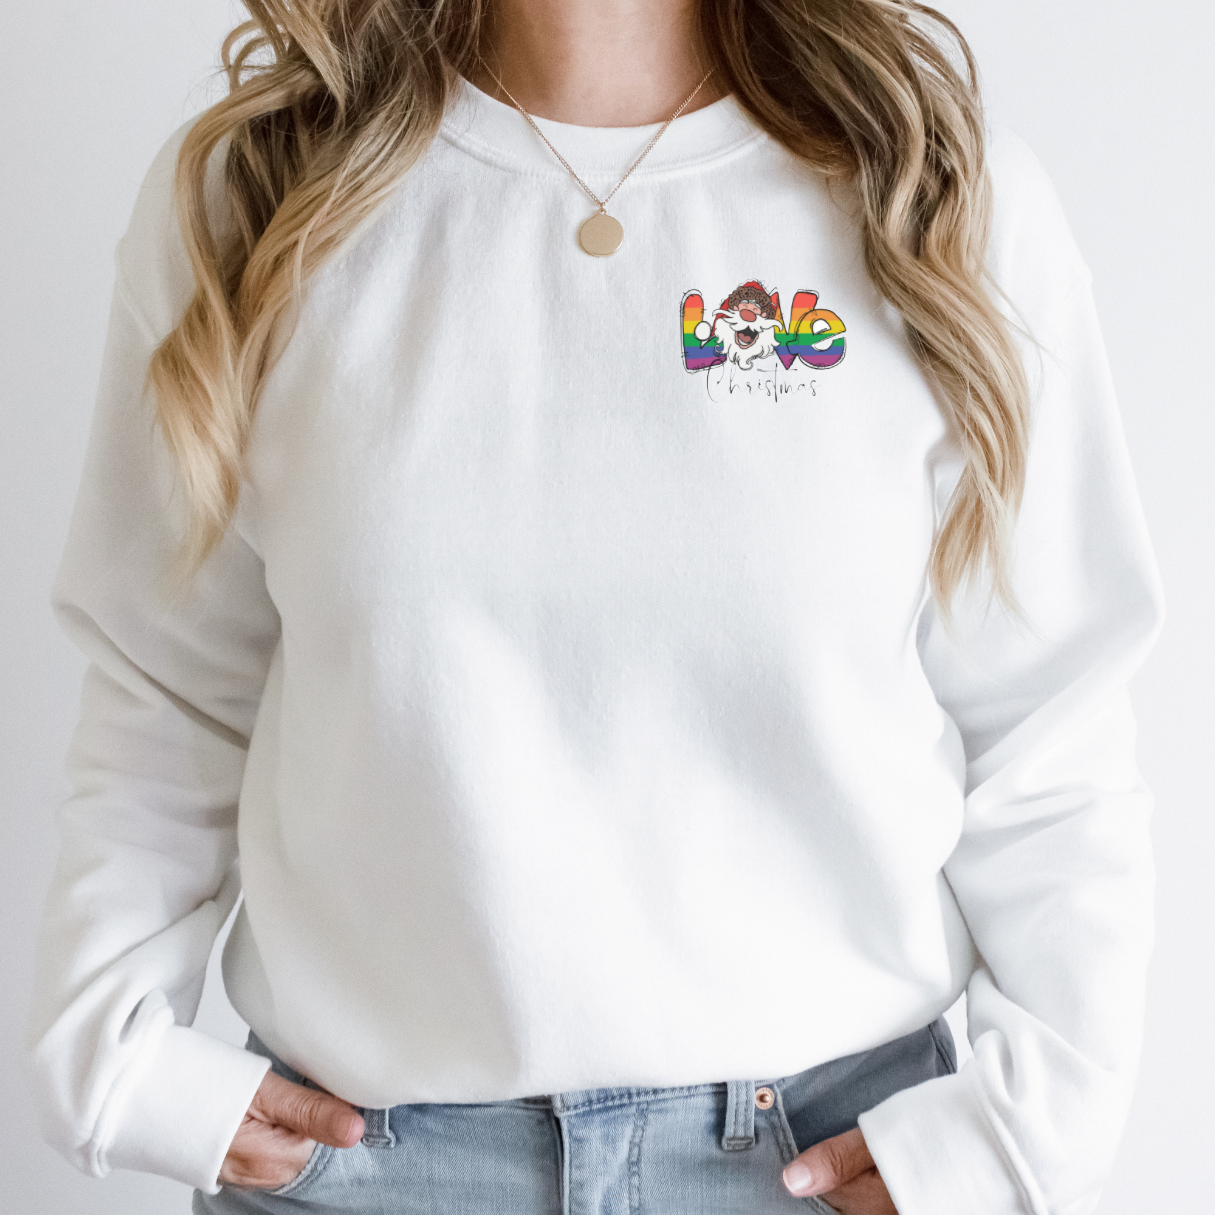 "Pride love Christmas text design centered on white sweater."